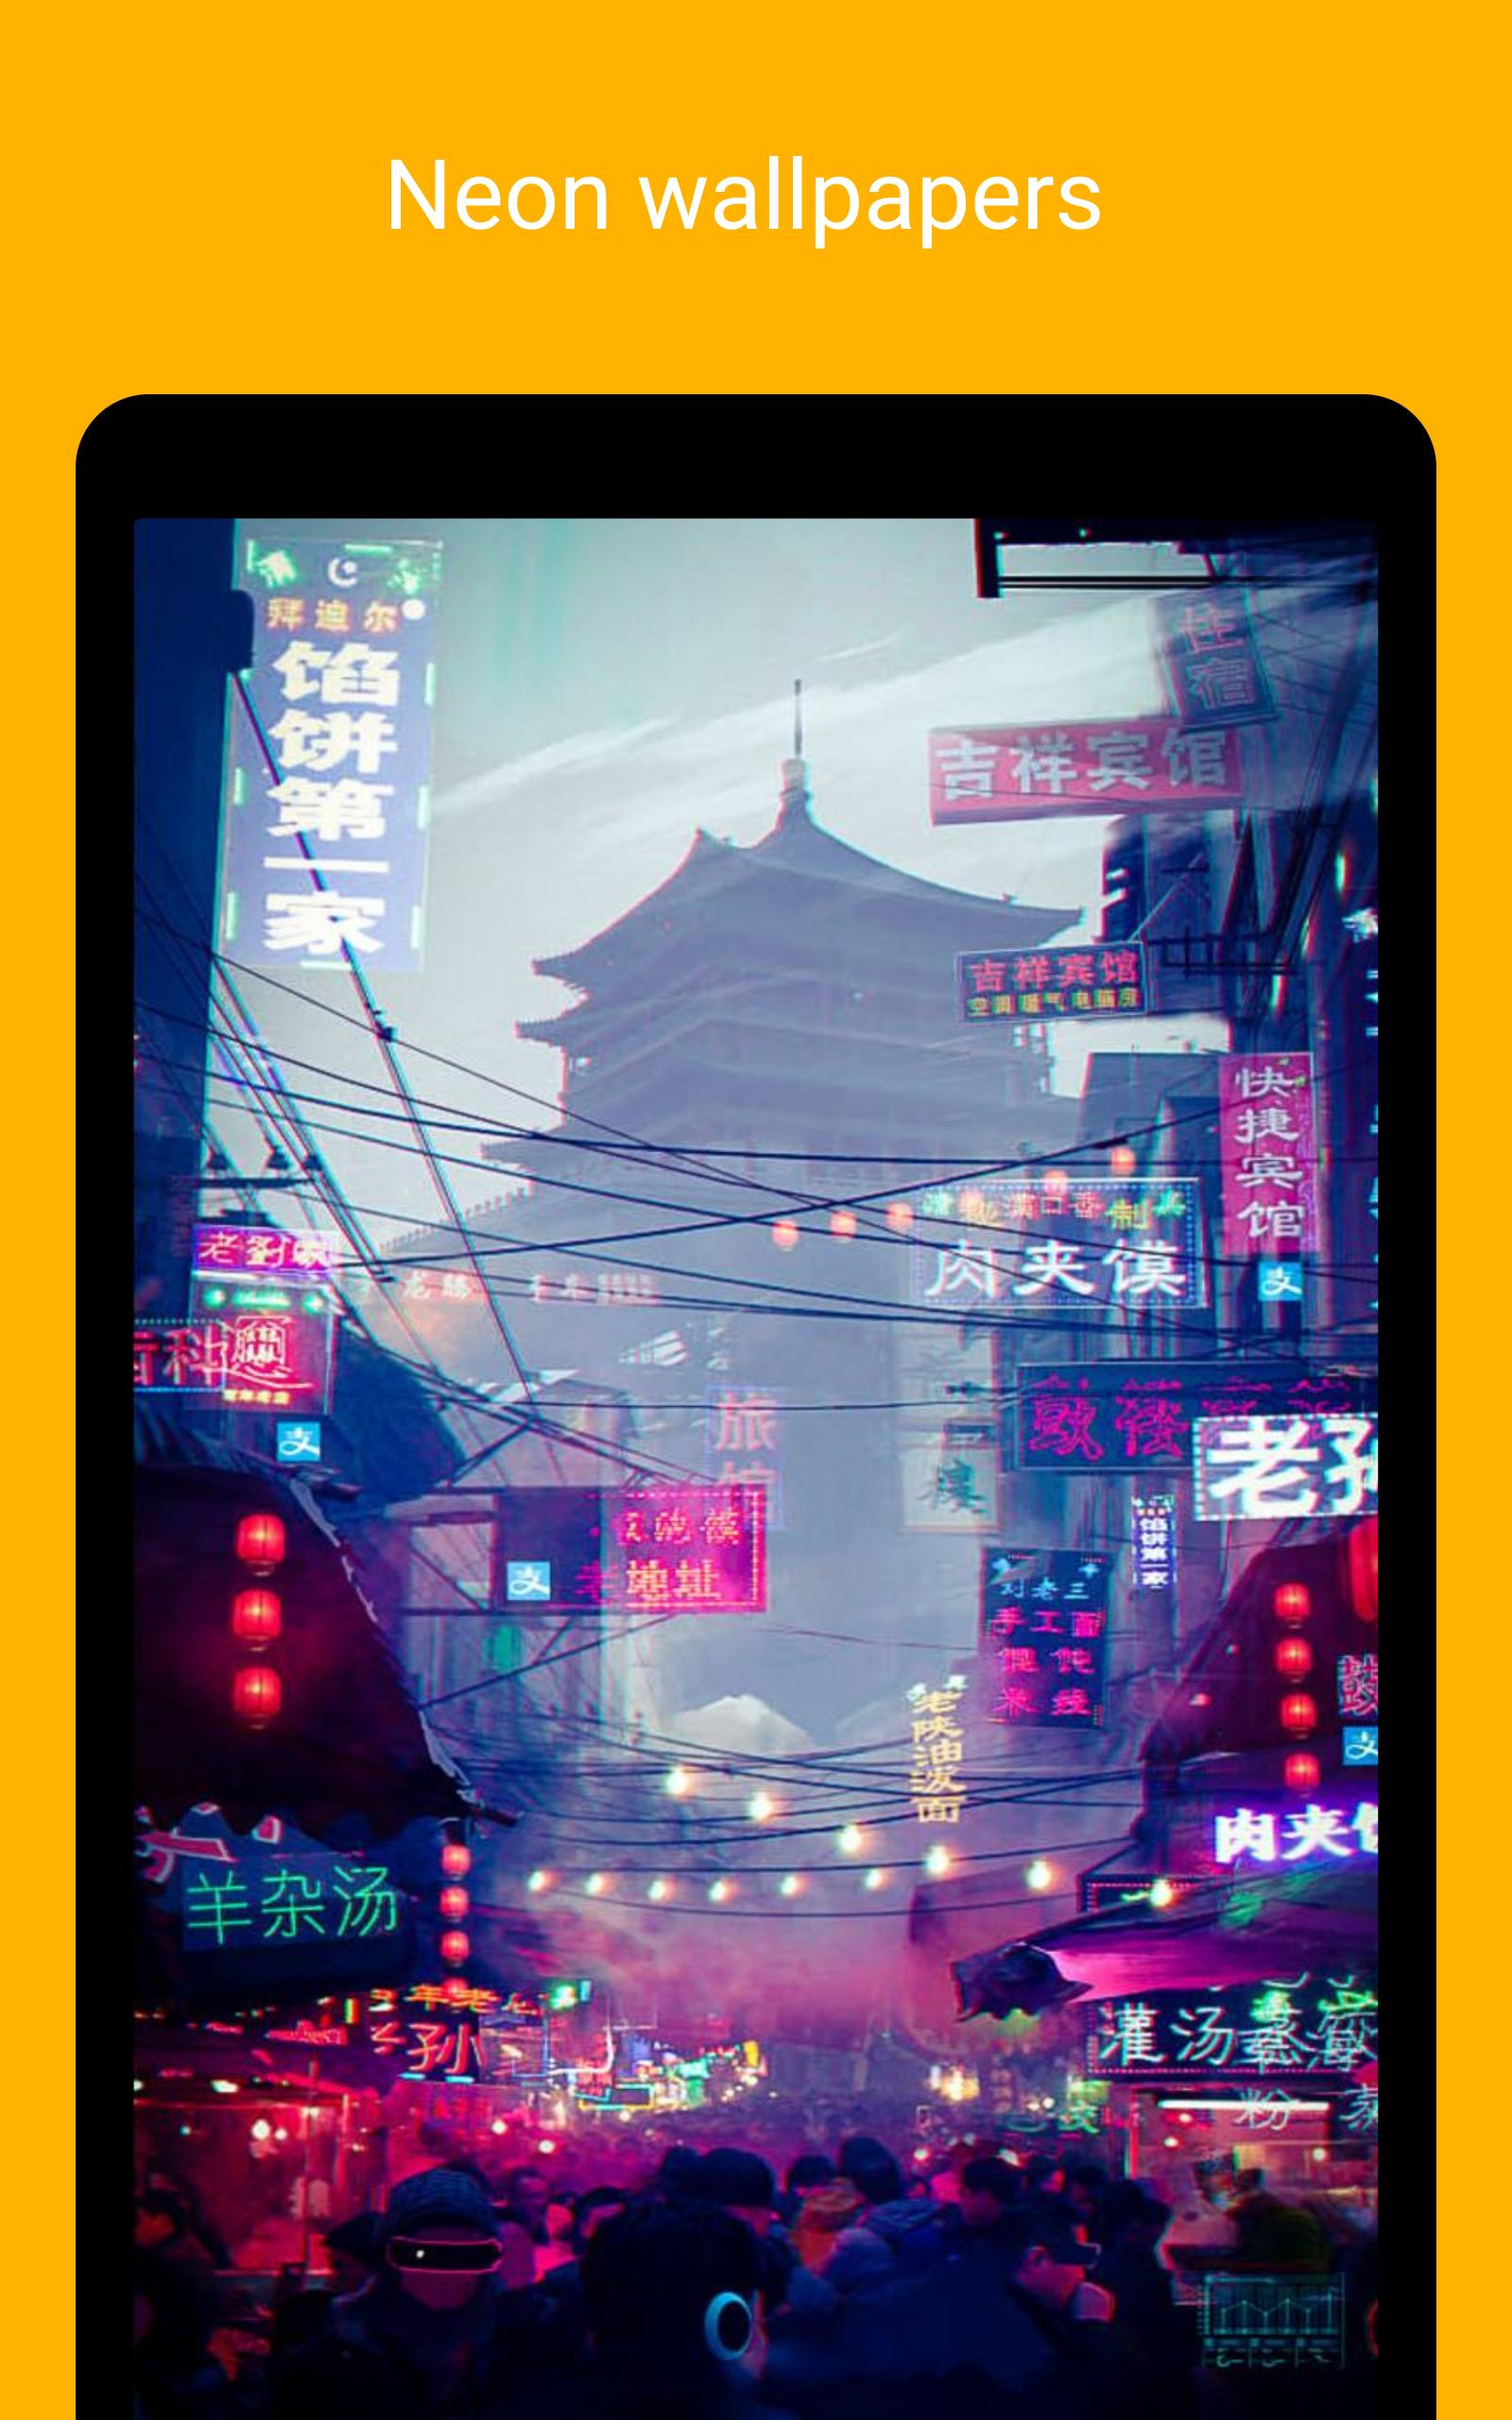 Neon Wallpaper Aesthetic Wallpaper For Android Apk Download